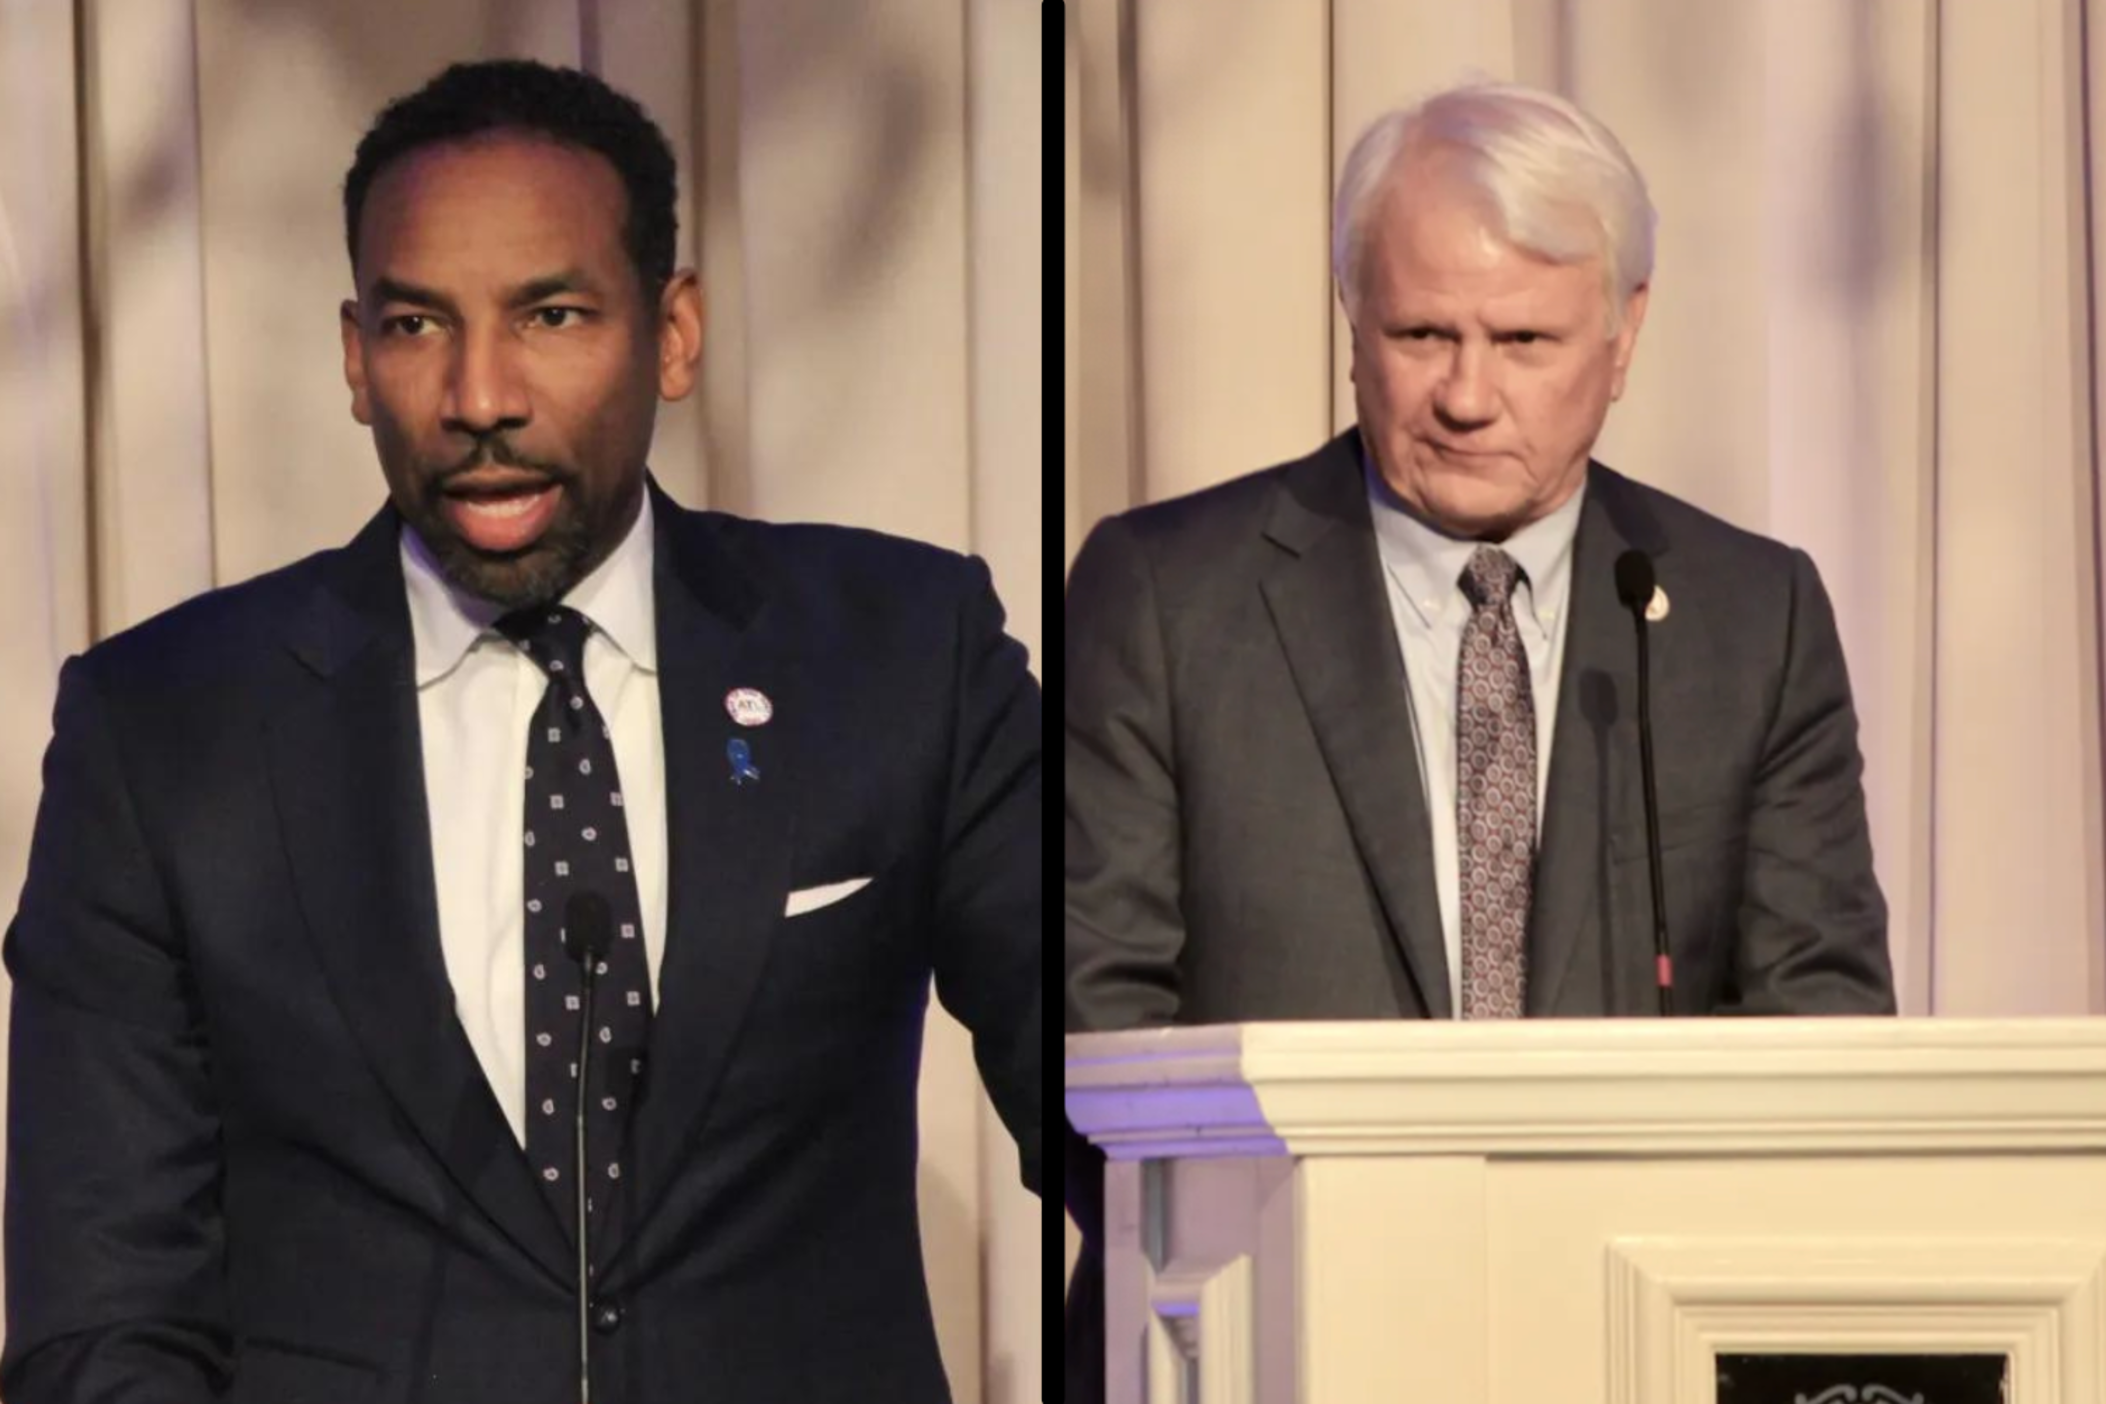 Atlanta Mayor Andre Dickens (left) received a standing ovation after his speech at the Buckhead Coalition’s annual luncheon on Jan. 25. At the event, Georgia House Speaker Jon Burns (right) said at the luncheon that he believed city and state policies and partnerships resulted in a drop in crime in Atlanta and Buckhead during 2023. 